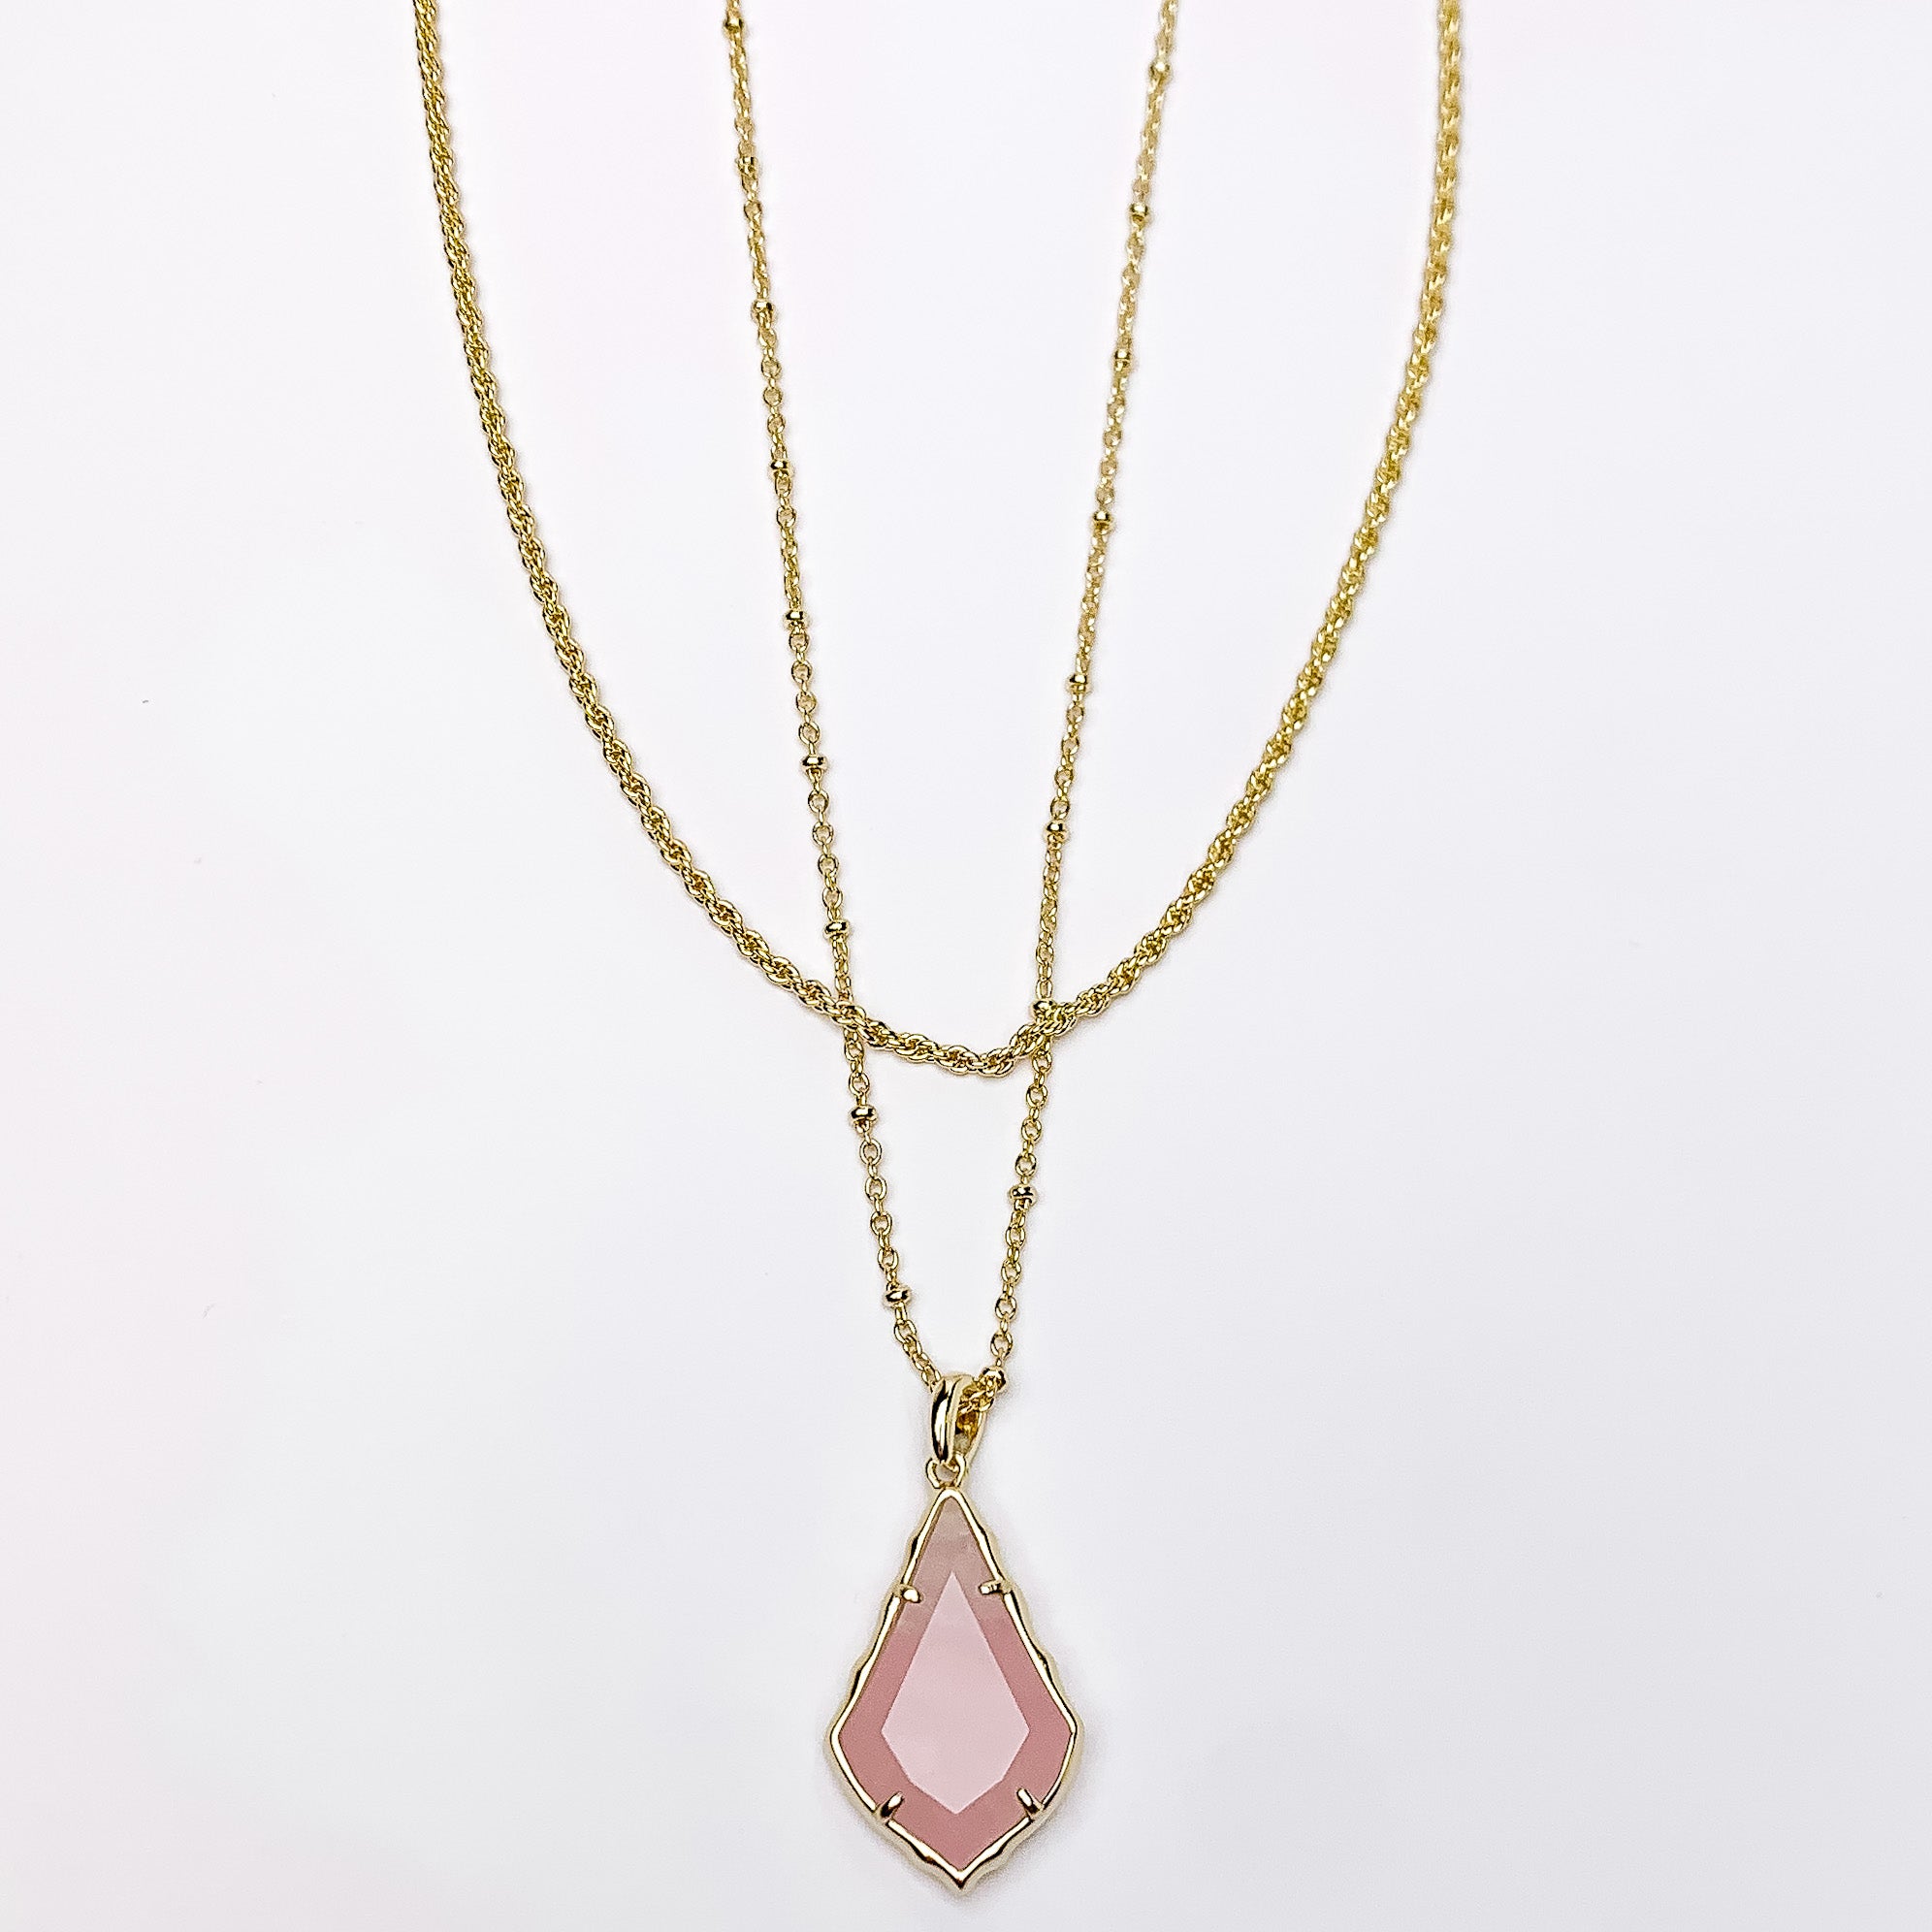 Two gold chain necklaces with the longer strand that has a gold and rose quartz pendant. This necklace is pictured on a white background. 